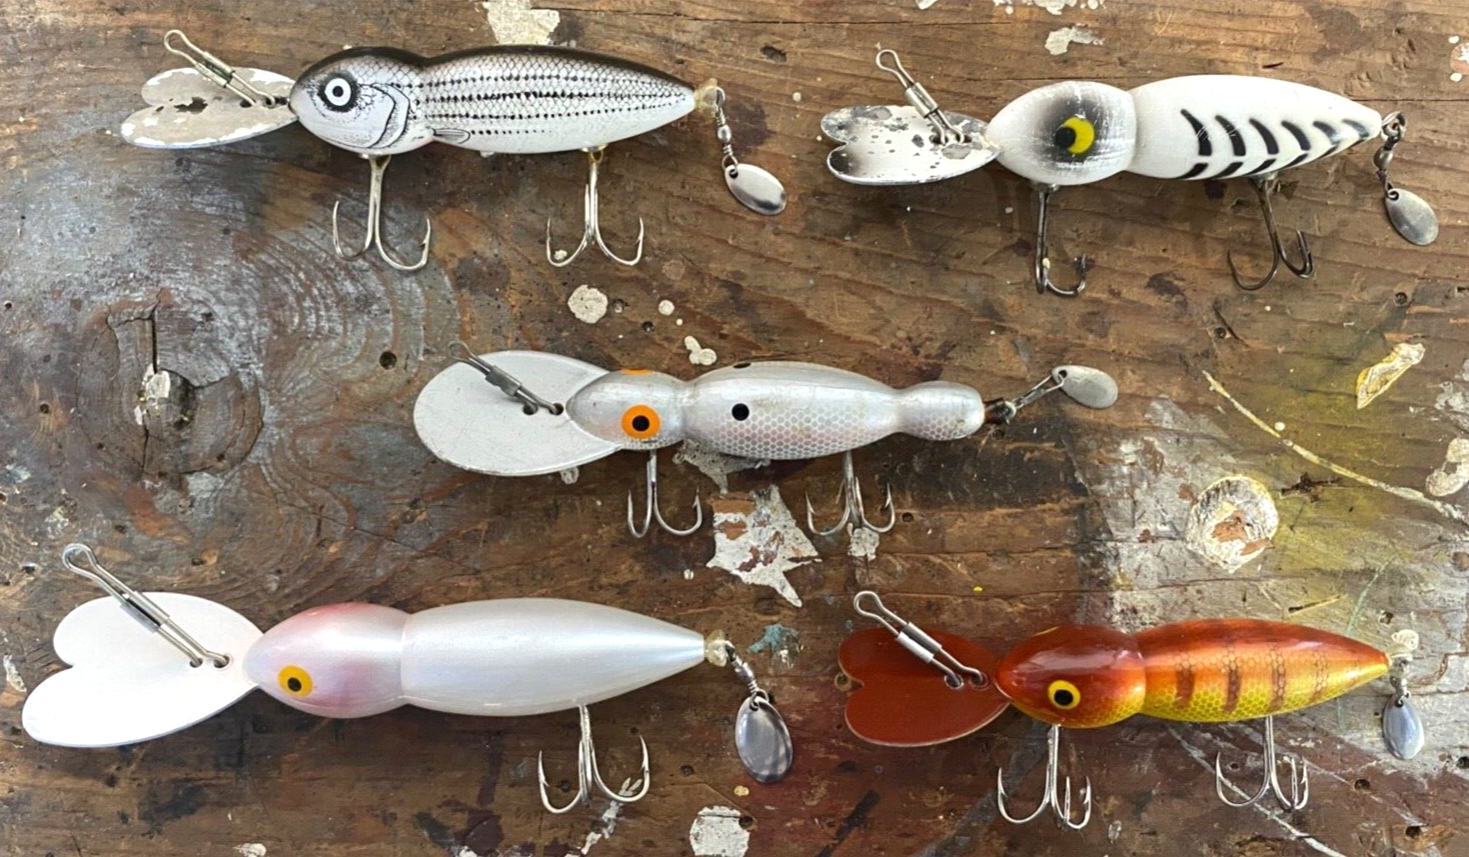 Lot of 5 LUXON Lures - Mixed Fishing Lures